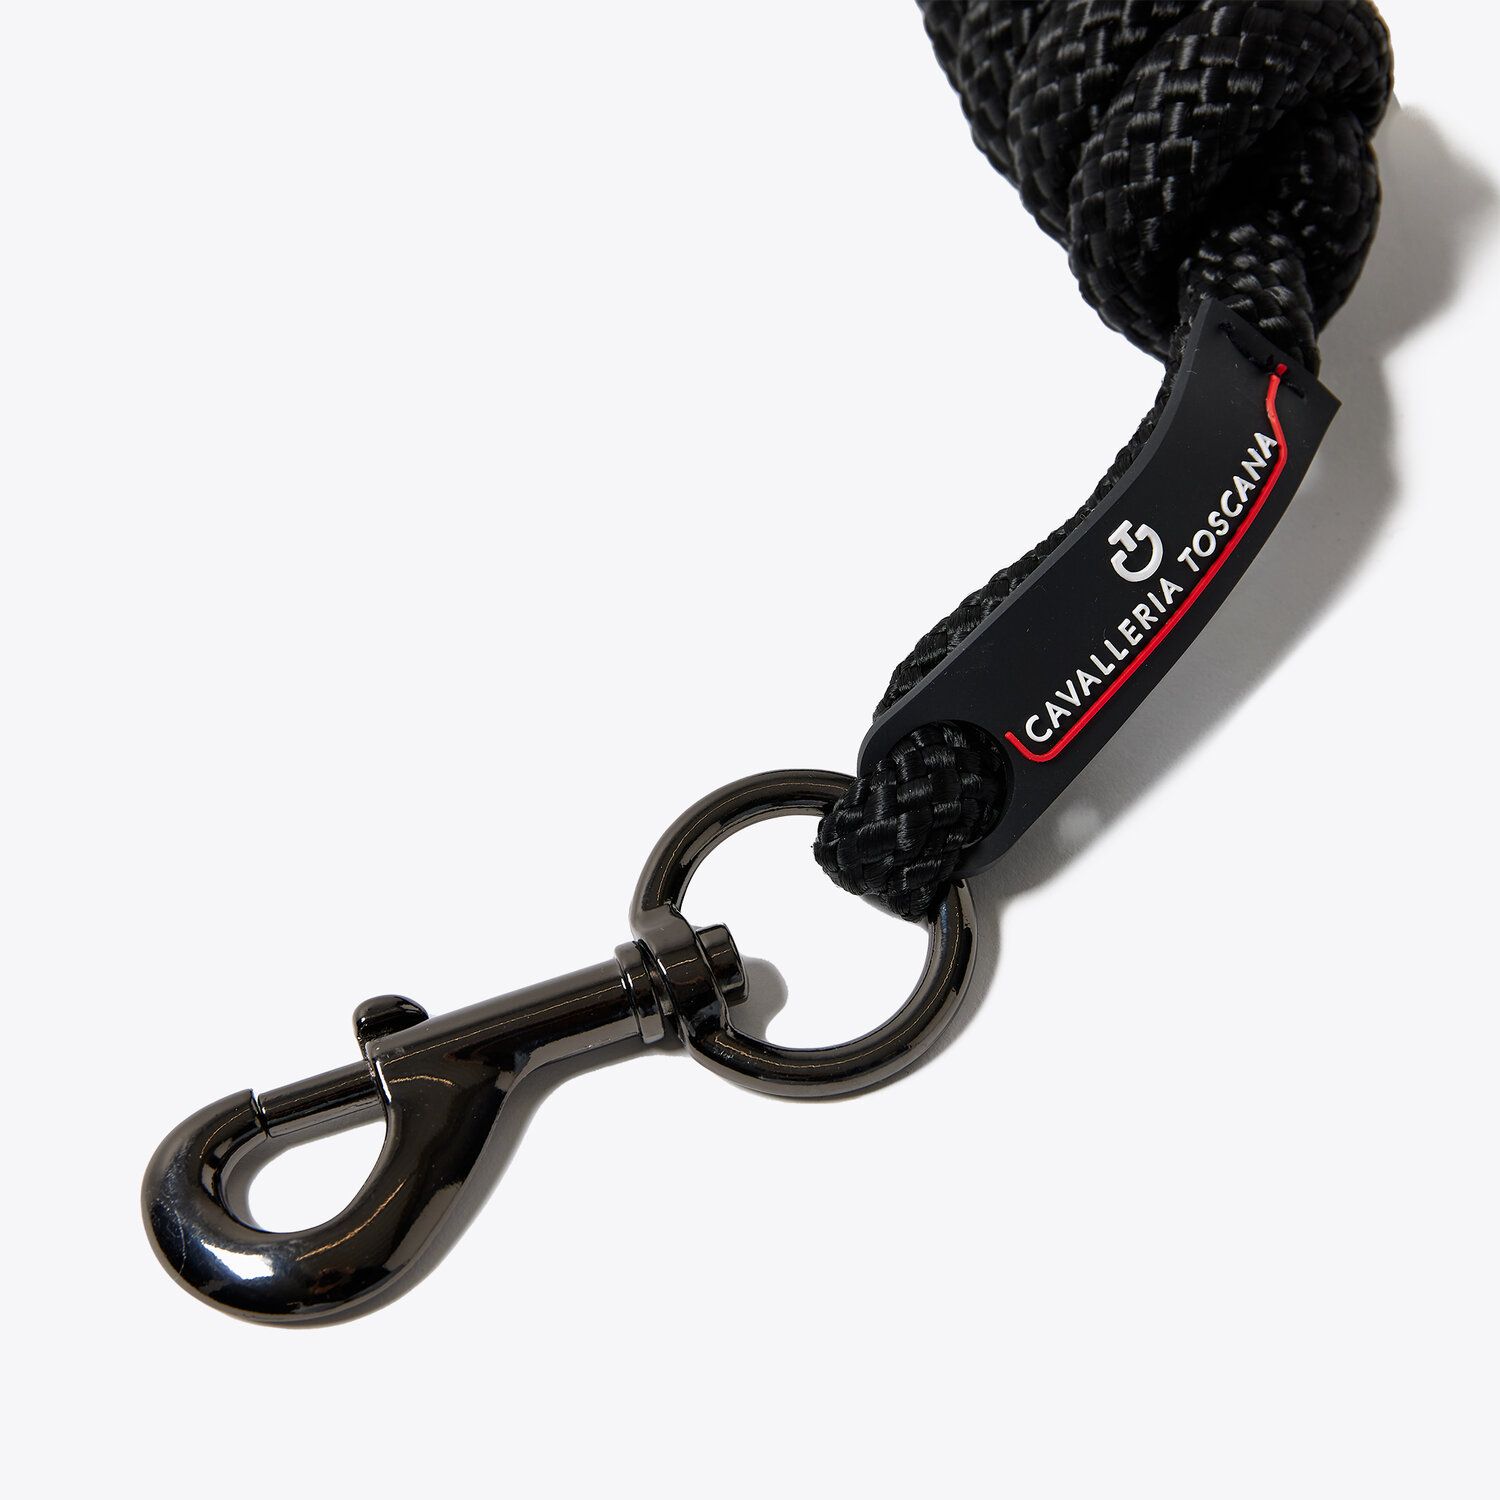 Cavalleria Toscana Lead rope with carabiner BLACK-2